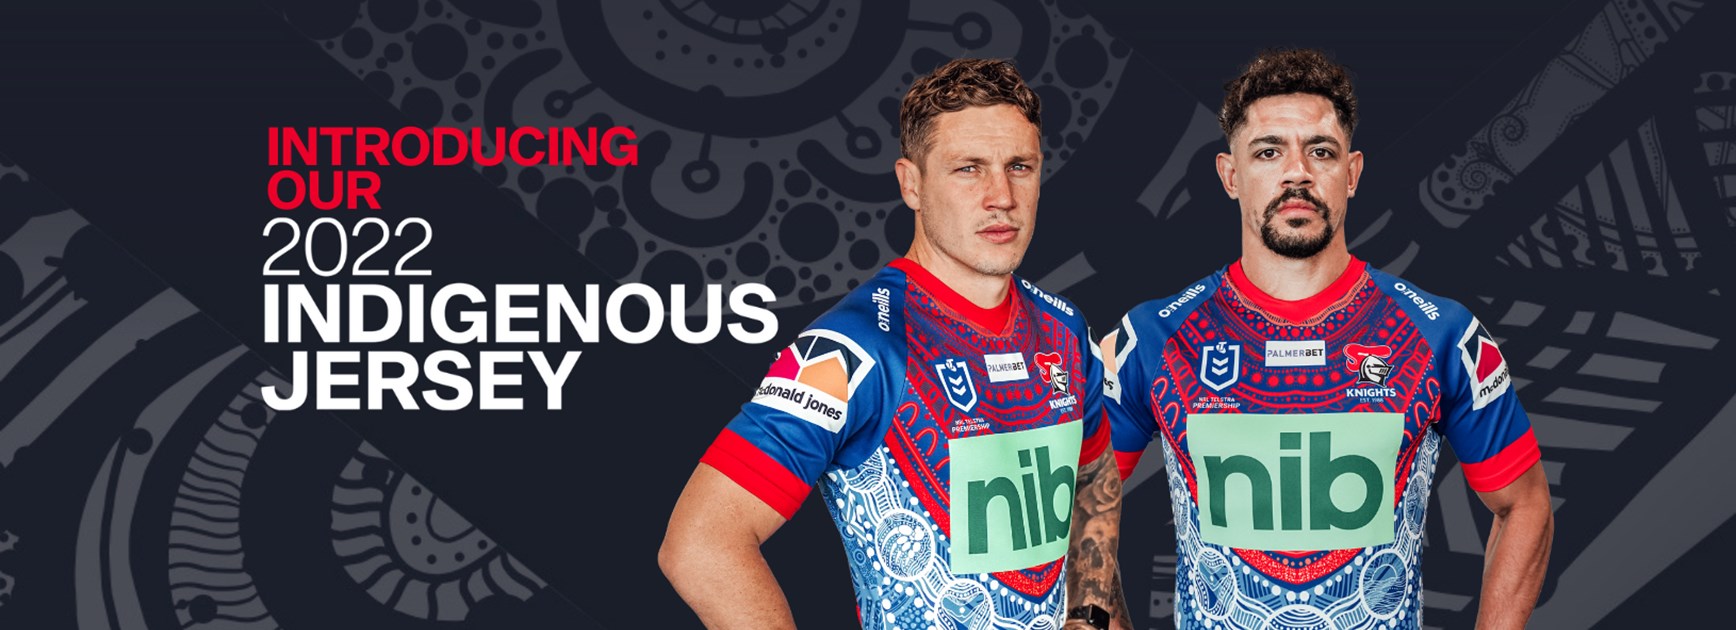 Nations of Northern NSW celebrated in new Indigenous Round Jersey